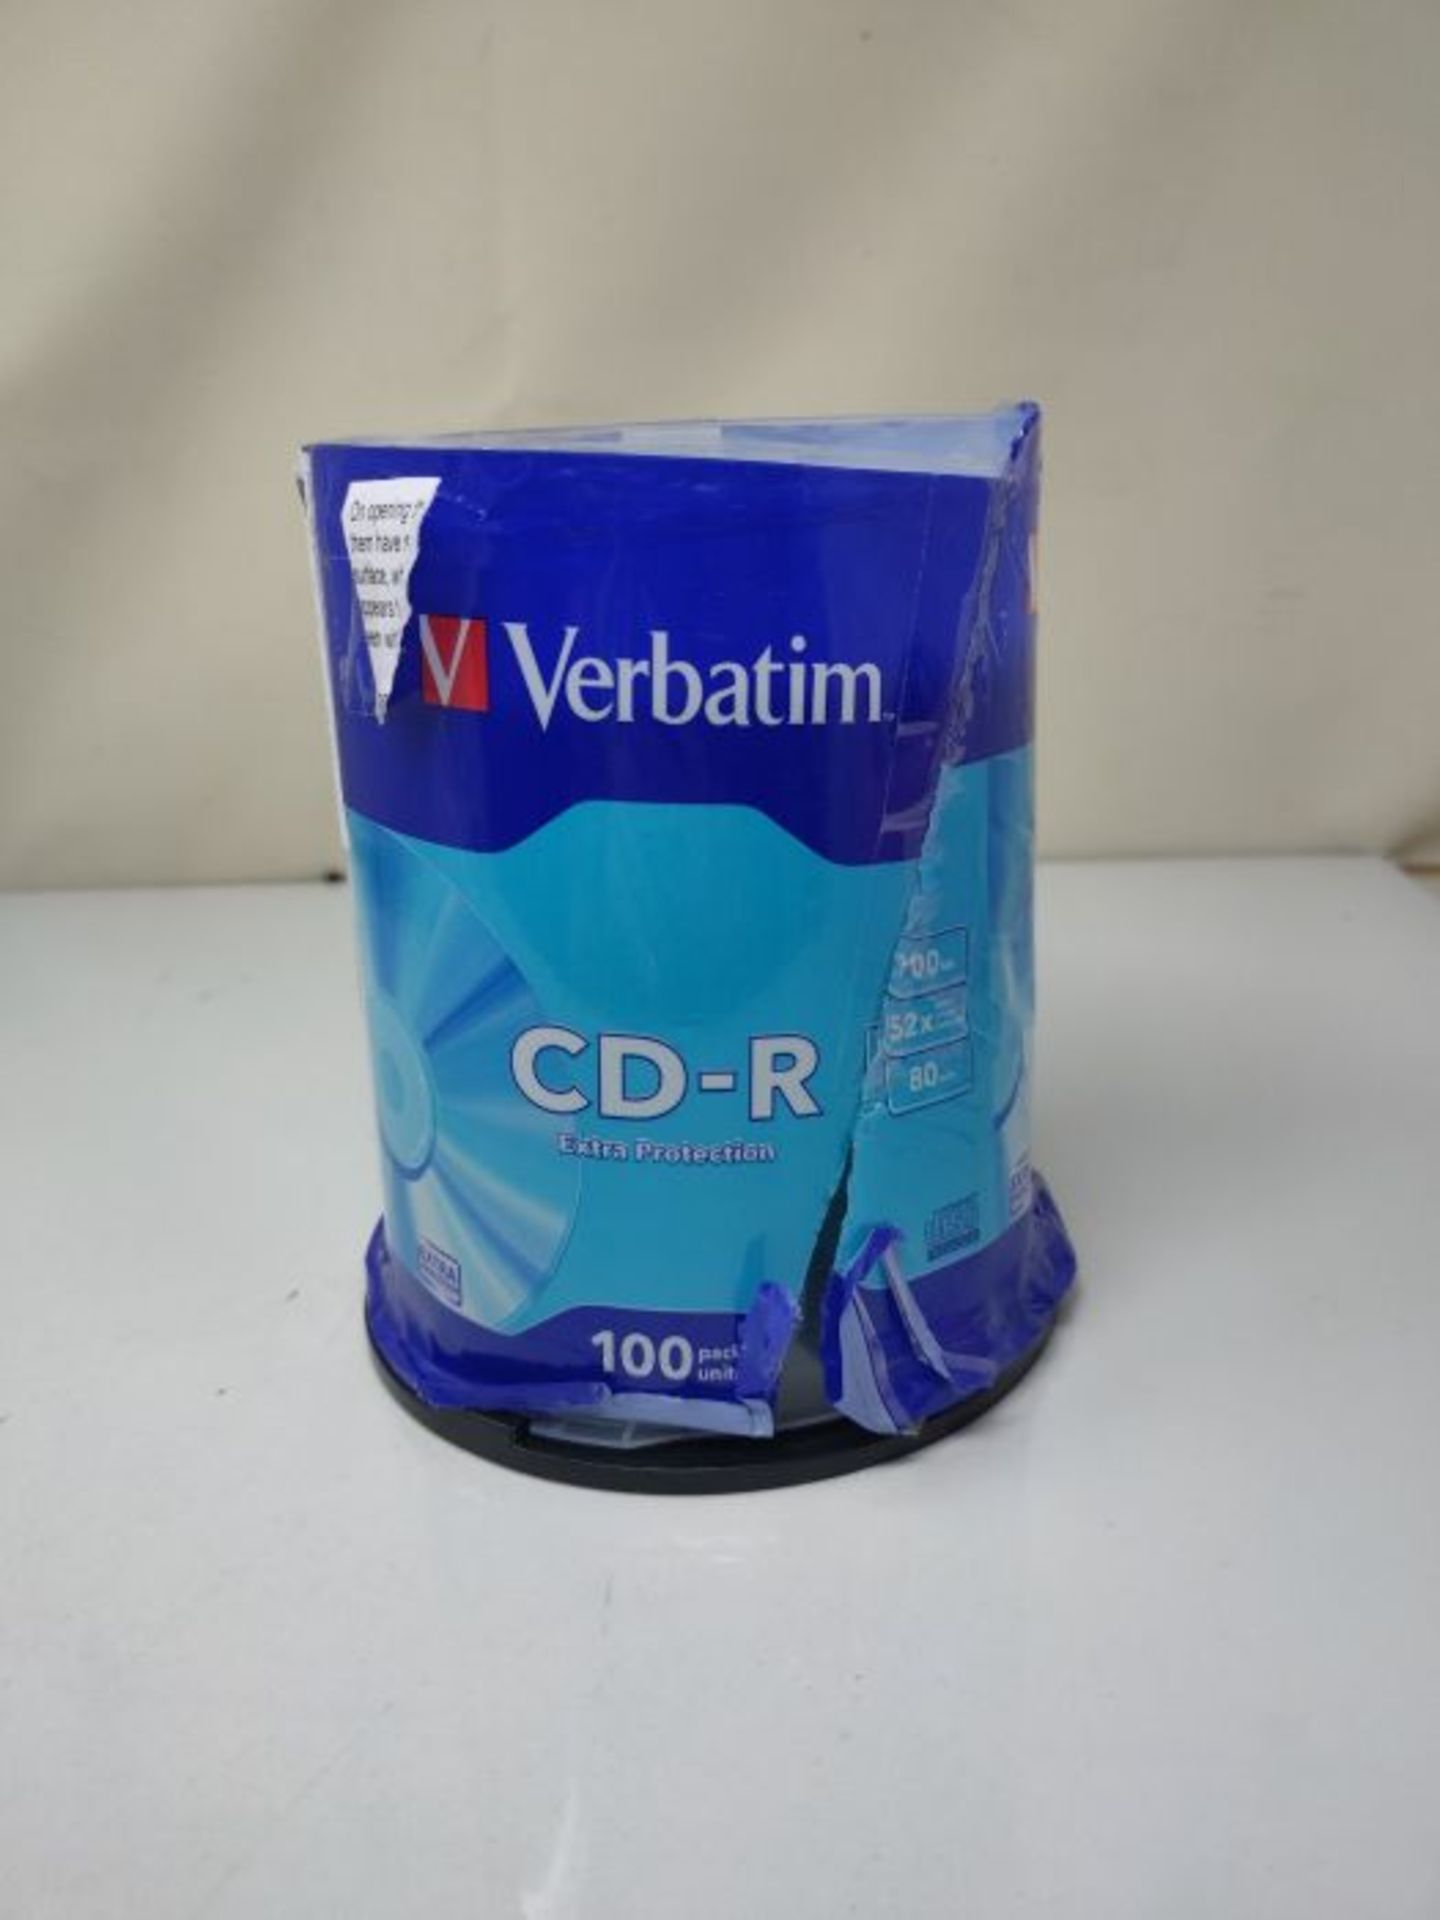 Verbatim 43411 700MB 52x Extra Protection CD-R - 100 Pack Spindle - Image 2 of 3